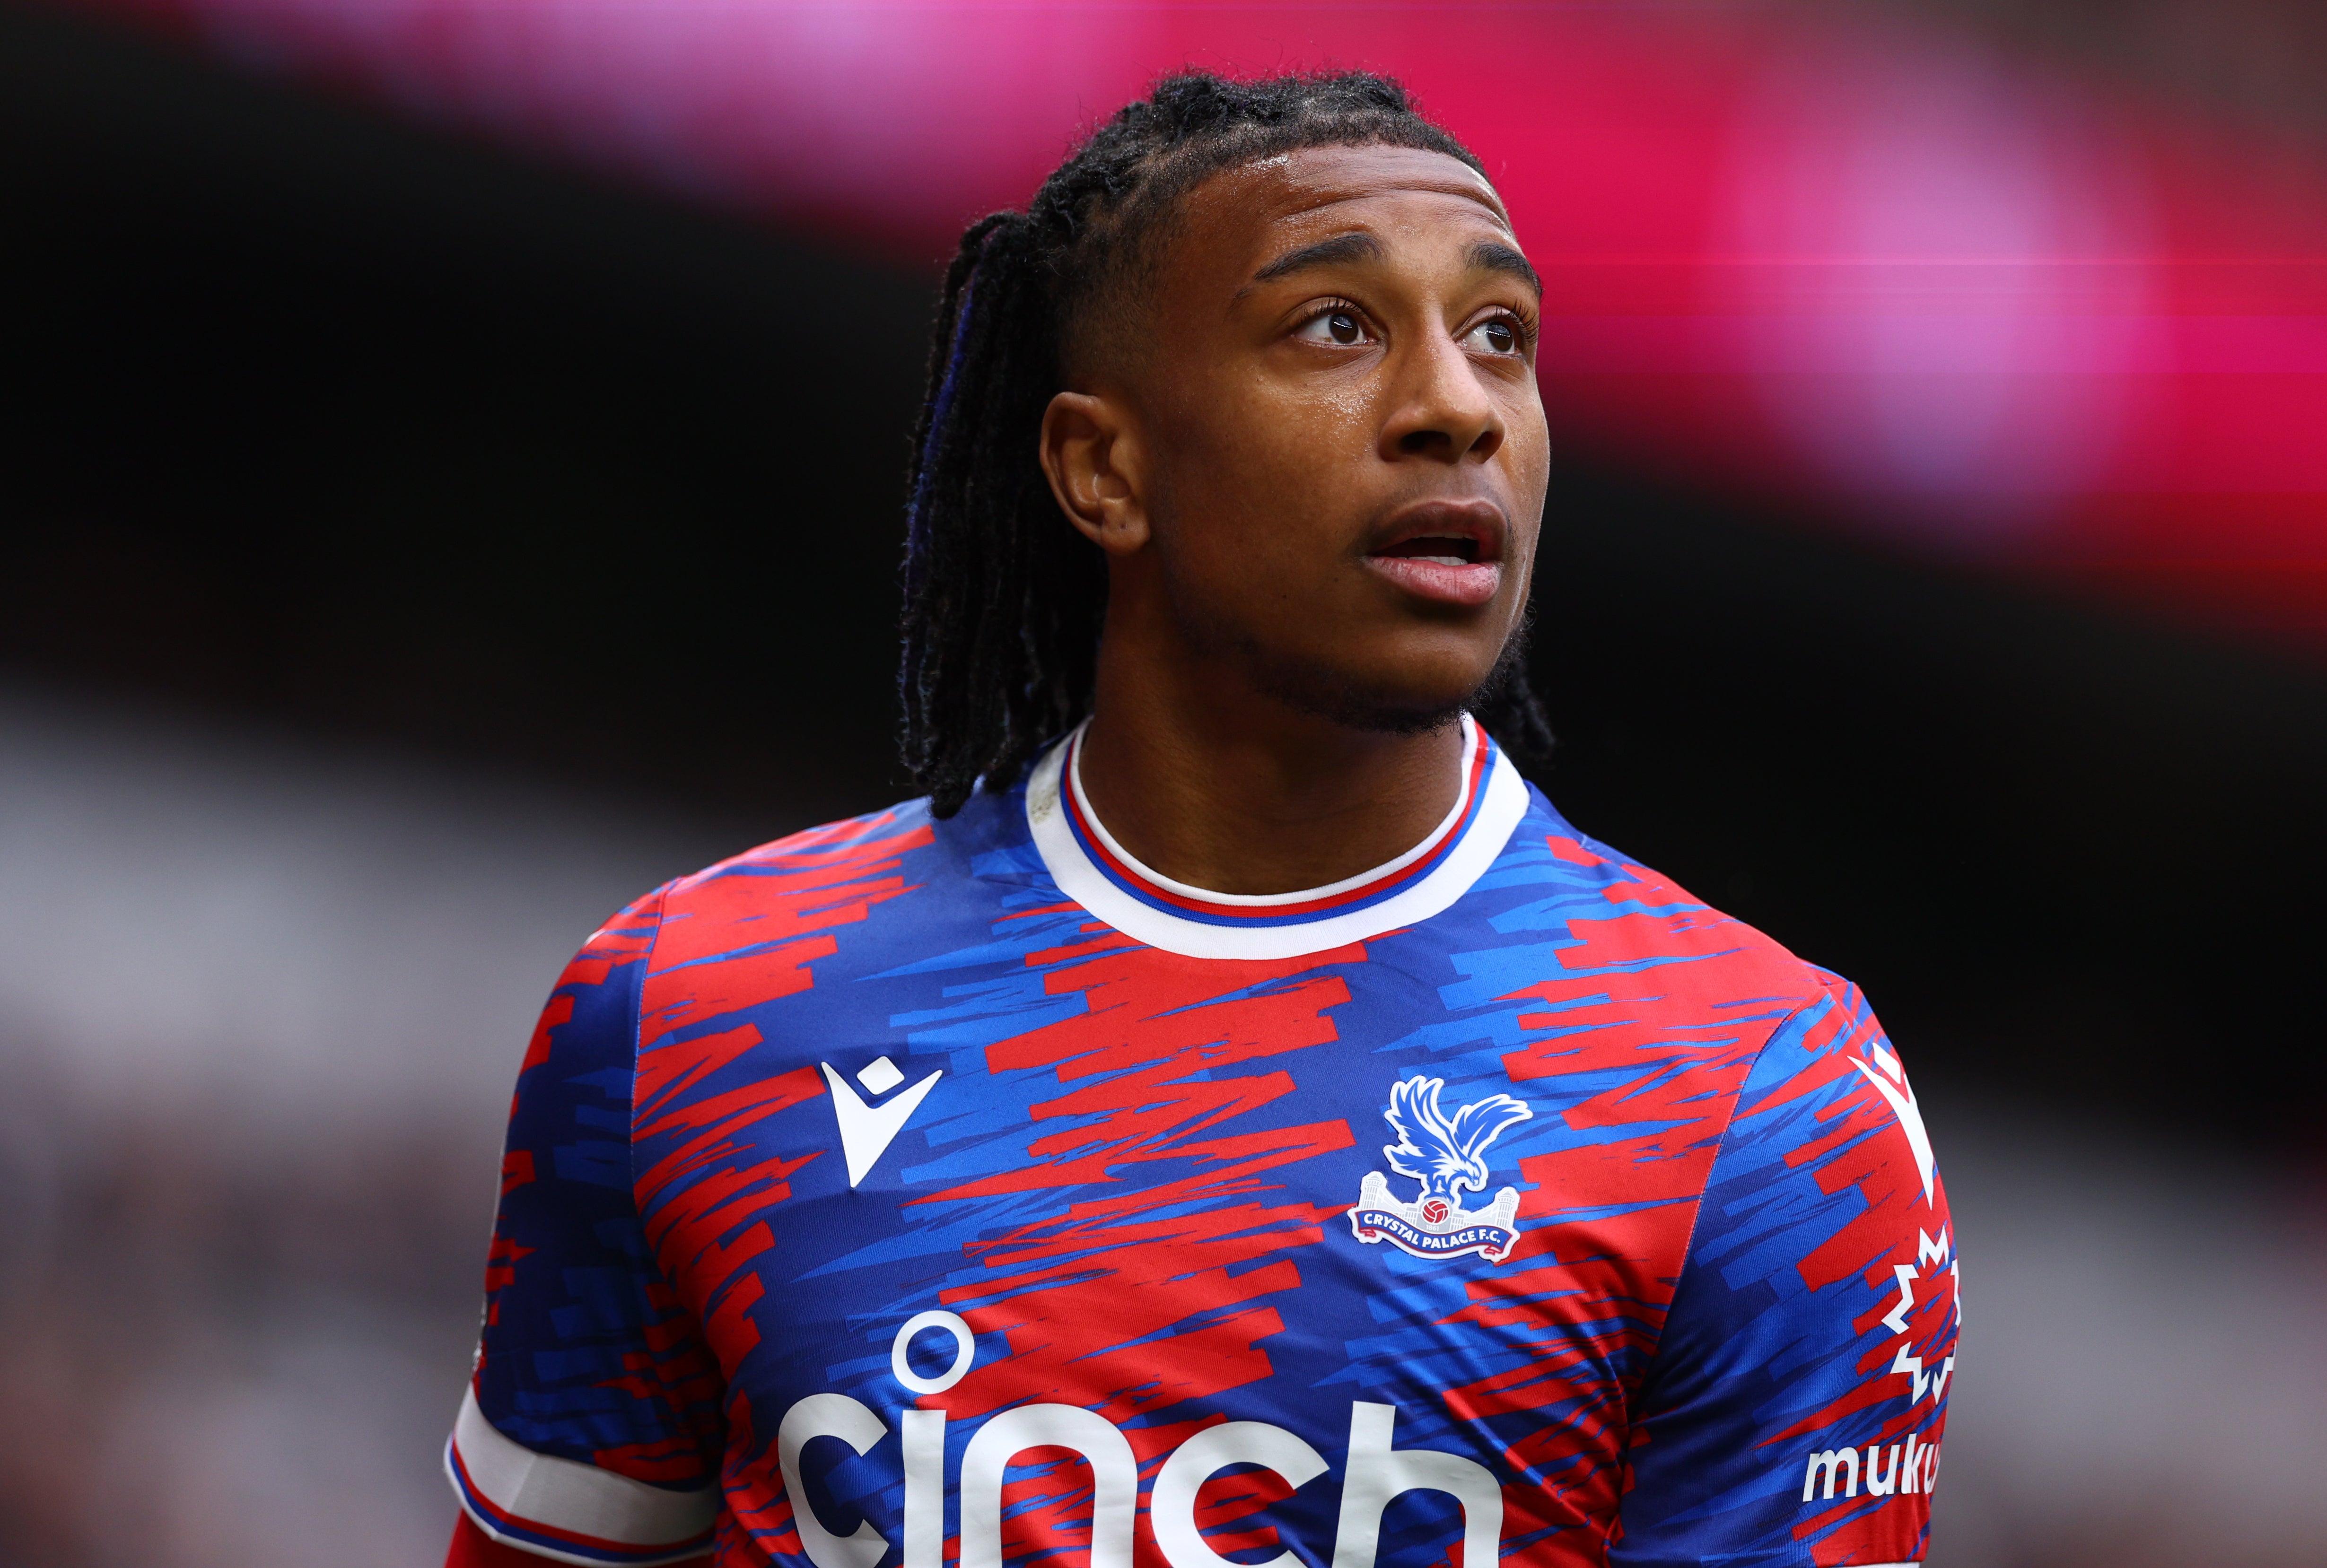  Michael Olise, a young and talented English professional footballer who plays as a winger for Premier League club Crystal Palace, is pictured here wearing the team's home jersey.